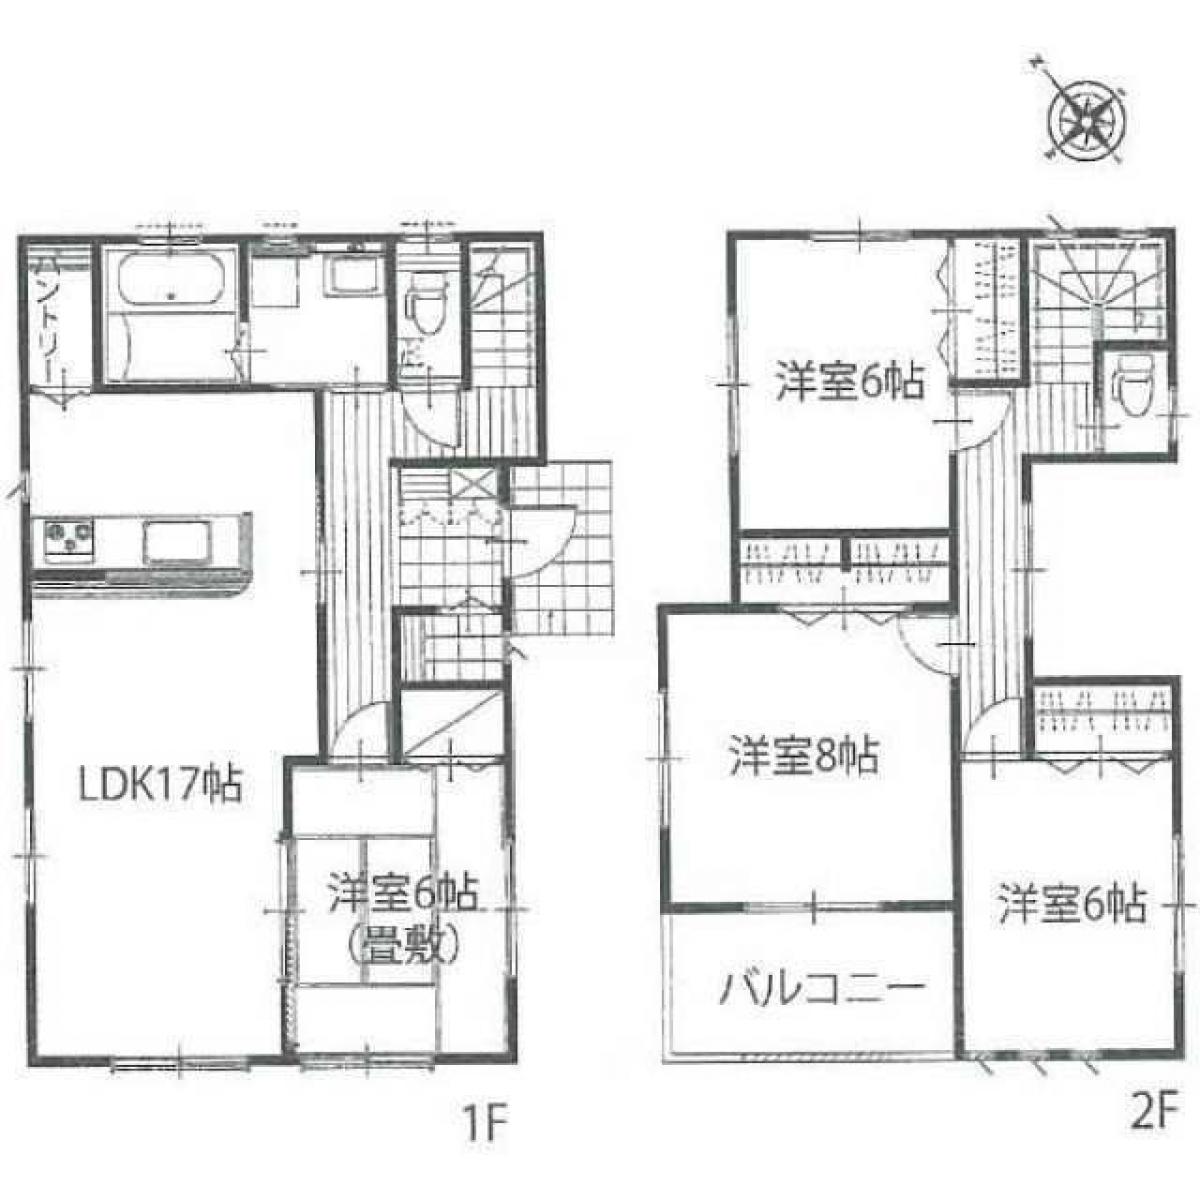 Picture of Home For Sale in Kimitsu Shi, Chiba, Japan